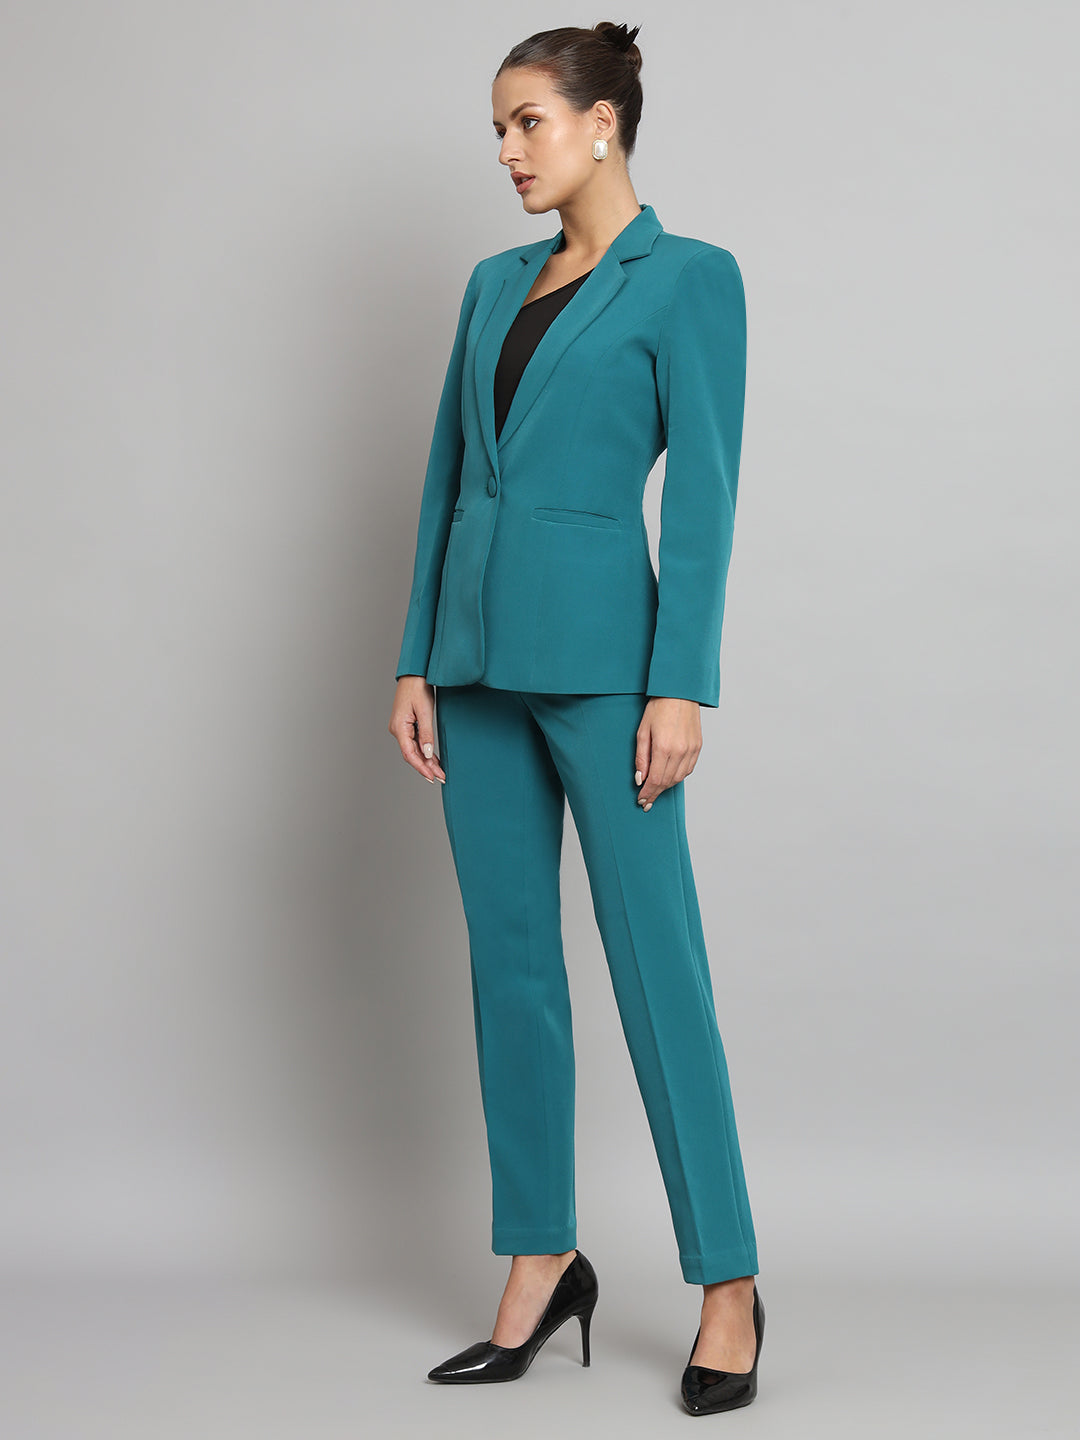 Teal Green Notch Collar Stretch Pant Suit